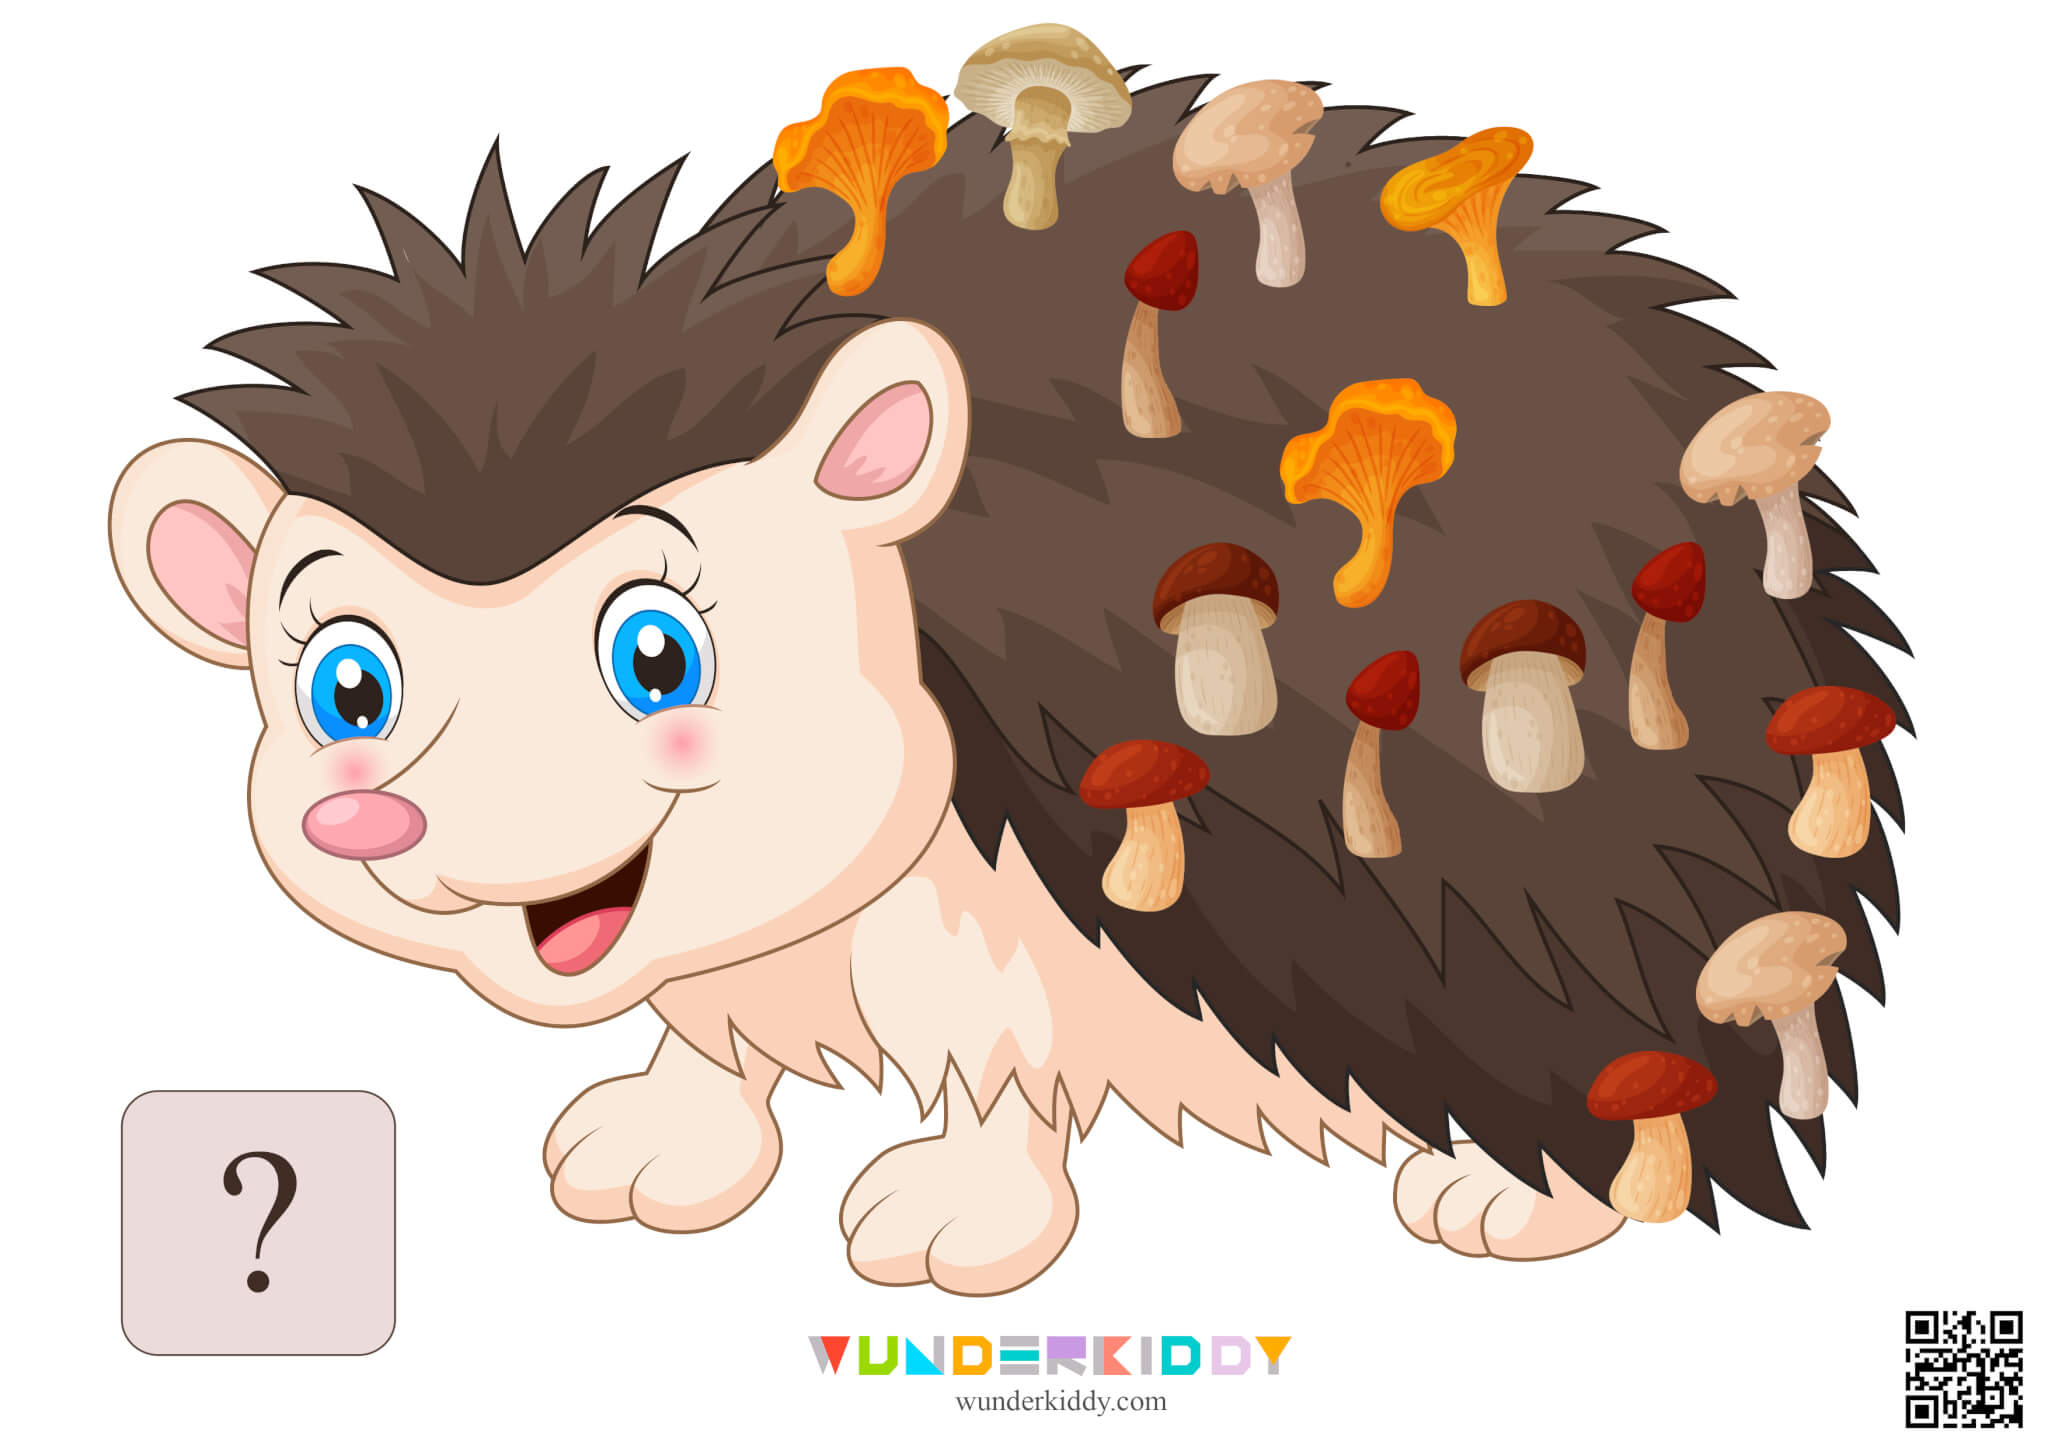 Worksheet Count to 20 with Hedgehog and Mushrooms - Image 19